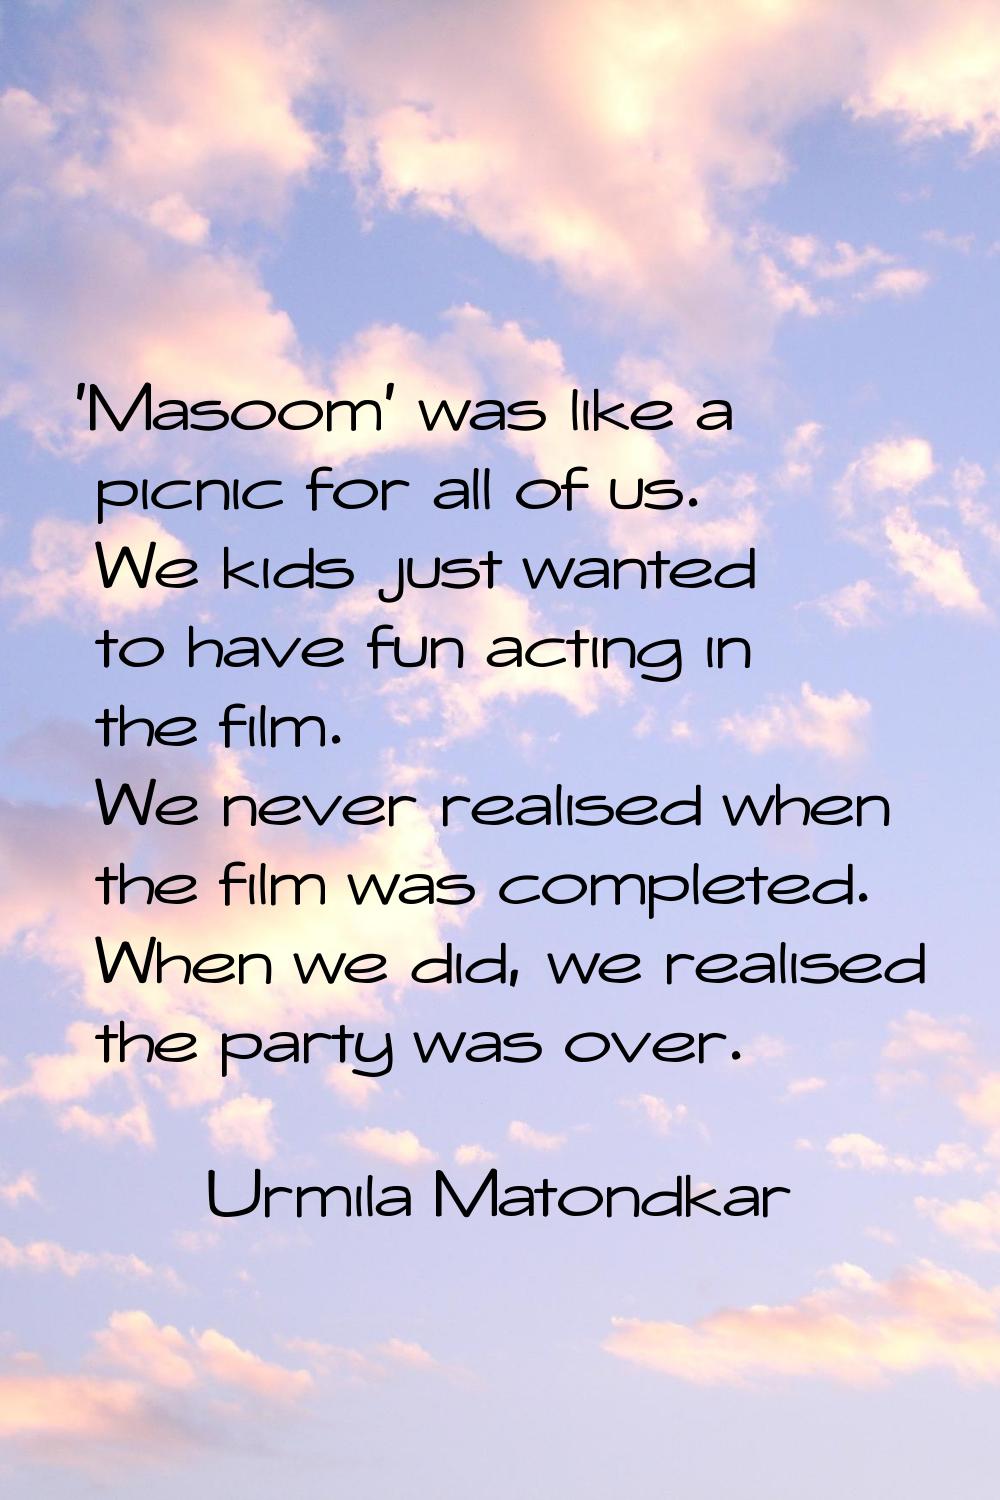 'Masoom' was like a picnic for all of us. We kids just wanted to have fun acting in the film. We ne